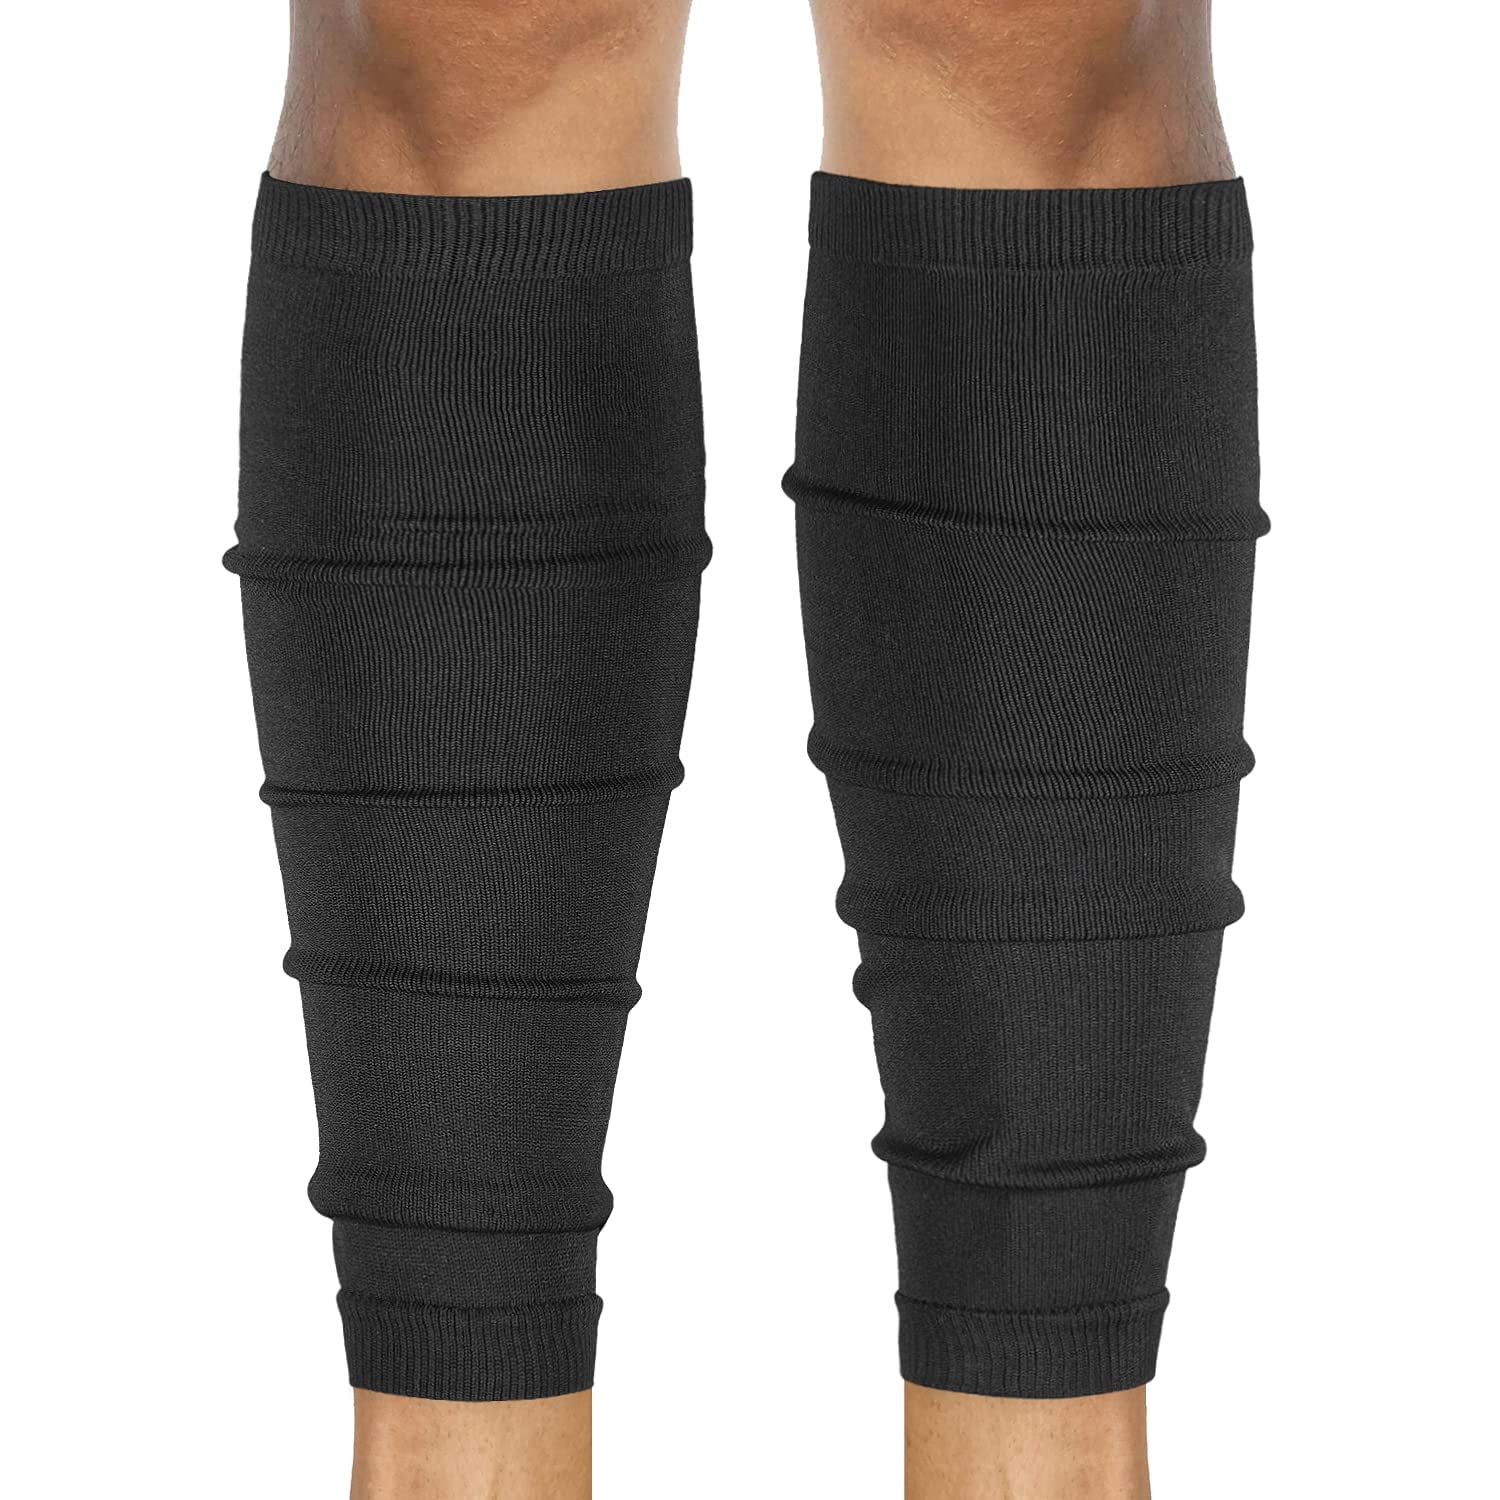 Football Leg Sleeve for Adults & Youth - Calf Compression Leg